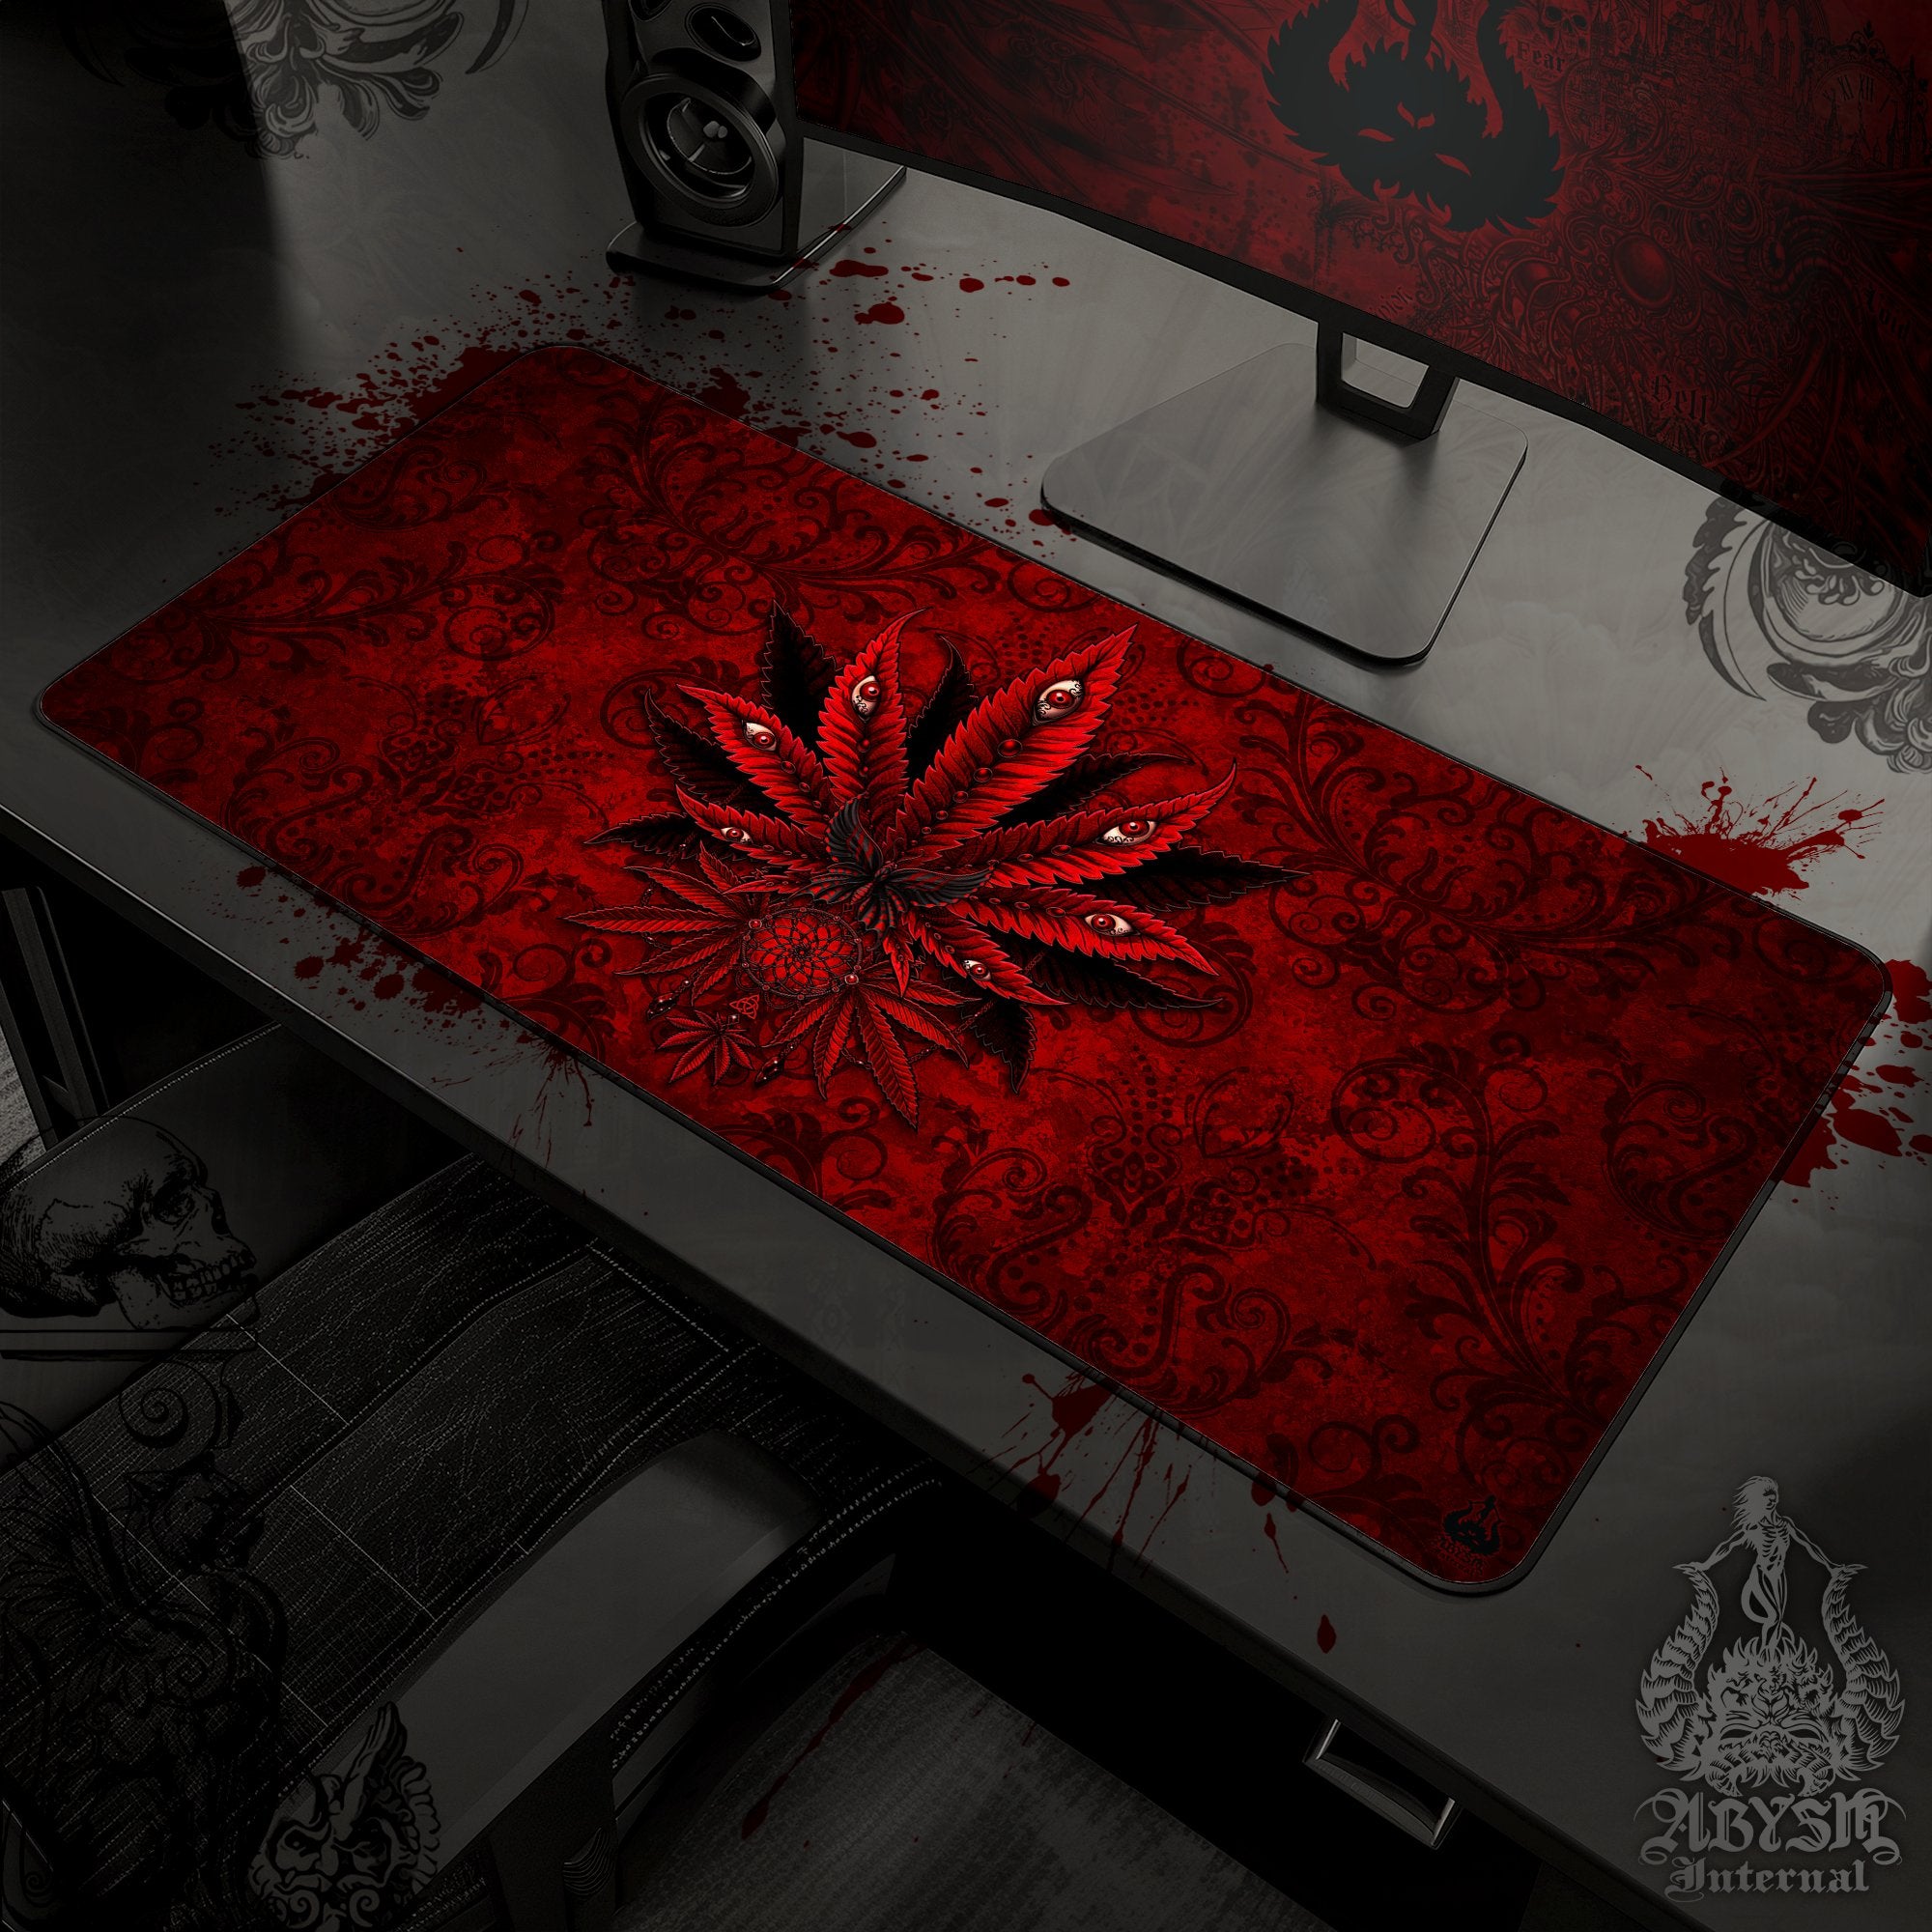 Cannabis Desk Mat, Marijuana Gaming Mouse Pad, Weed Table Protector Cover, Bloody Gothic Workpad, 420 Art Print - Red Black - Abysm Internal